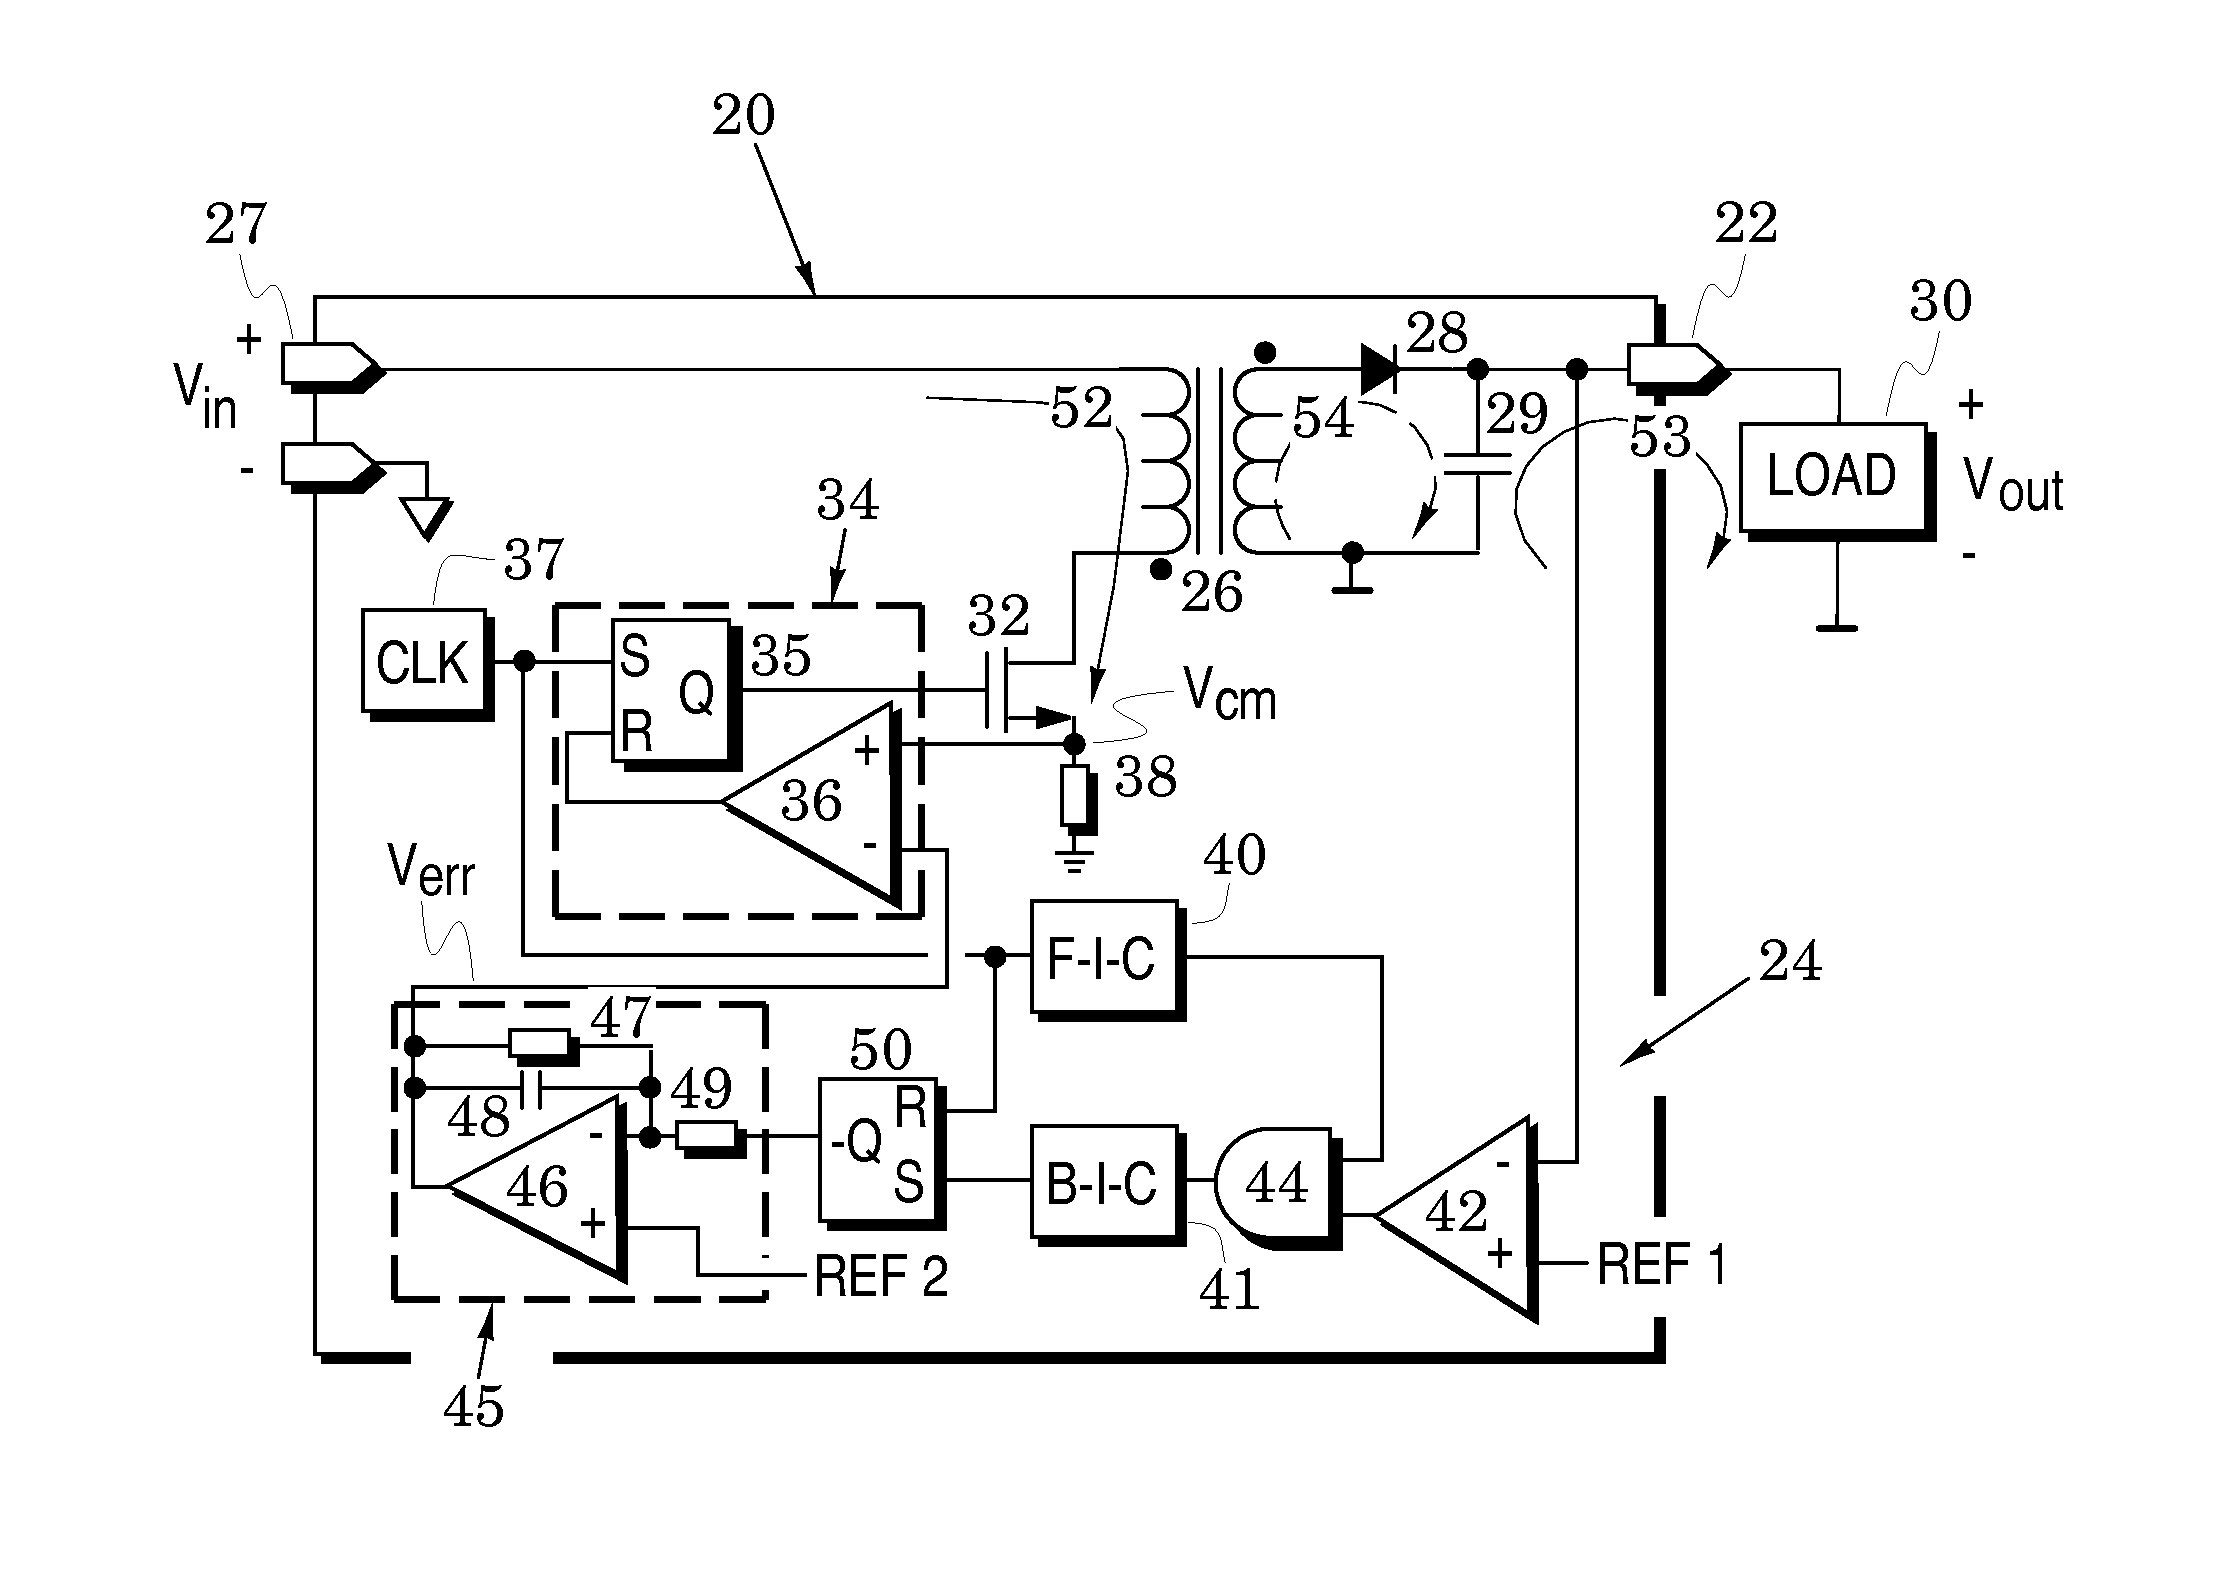 Switching converter systems with isolating digital feedback loops